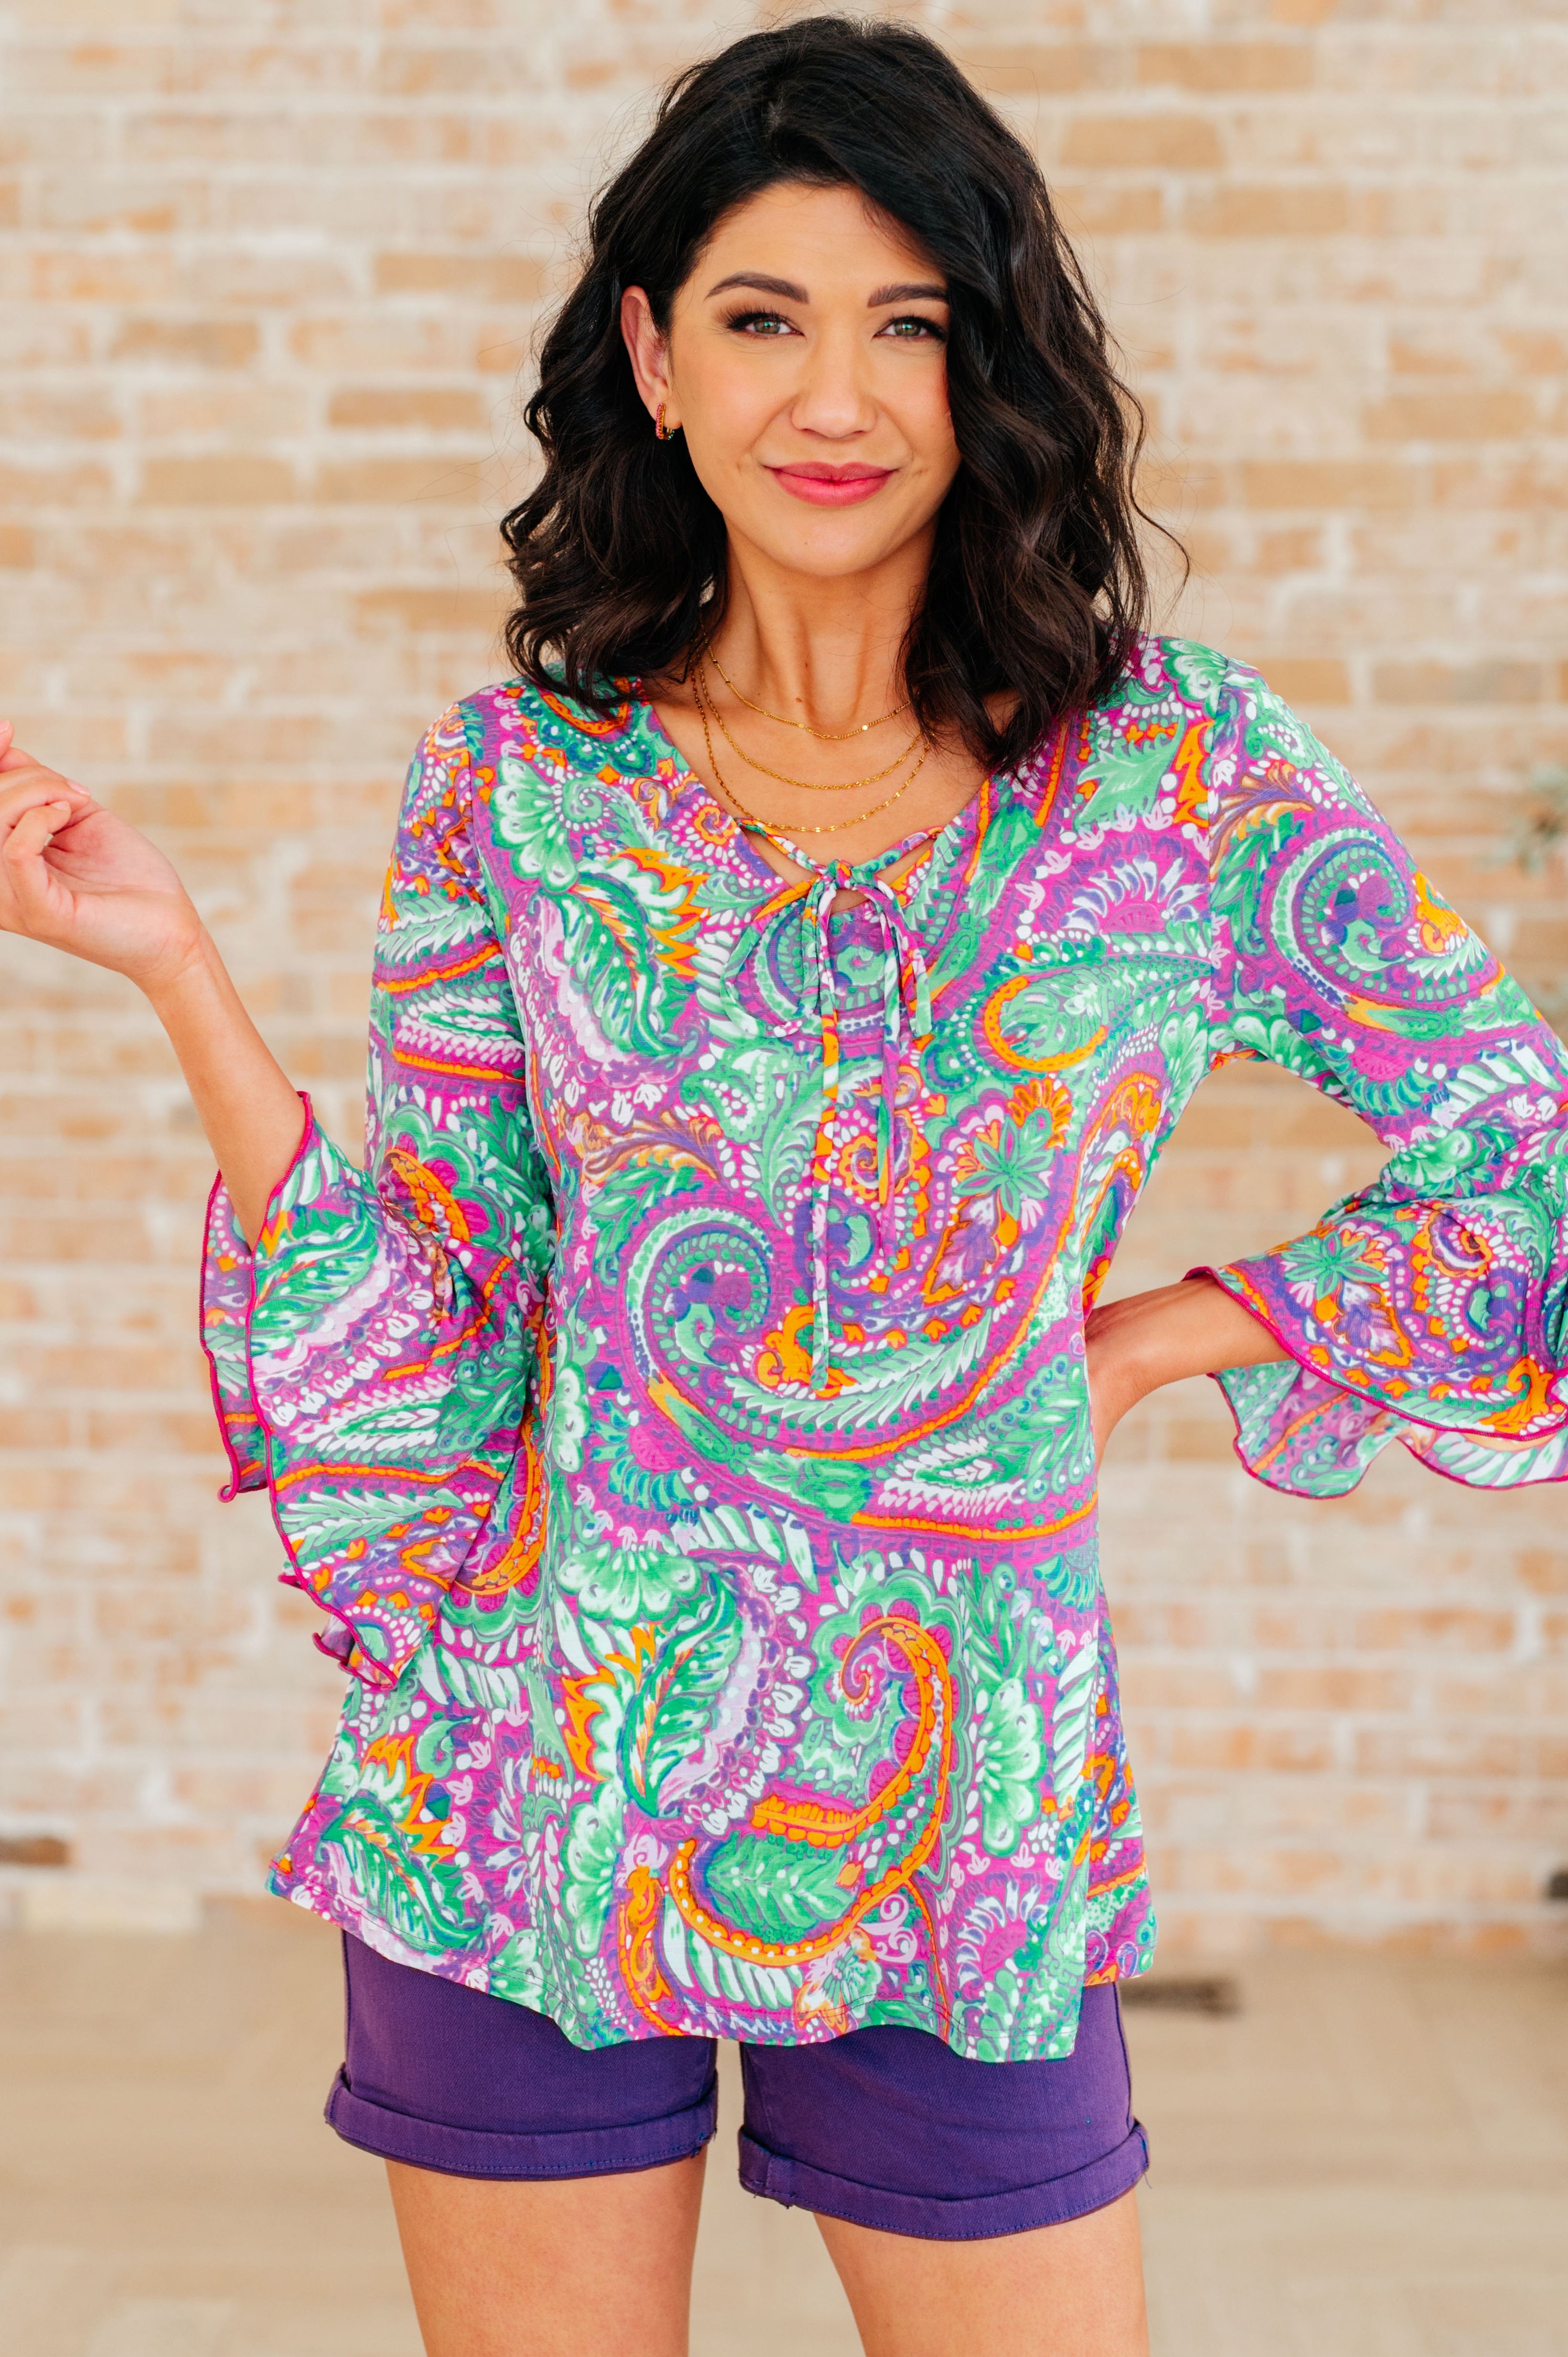 Willow Bell Sleeve Top in Lavender Mint Paisley Ave Shops